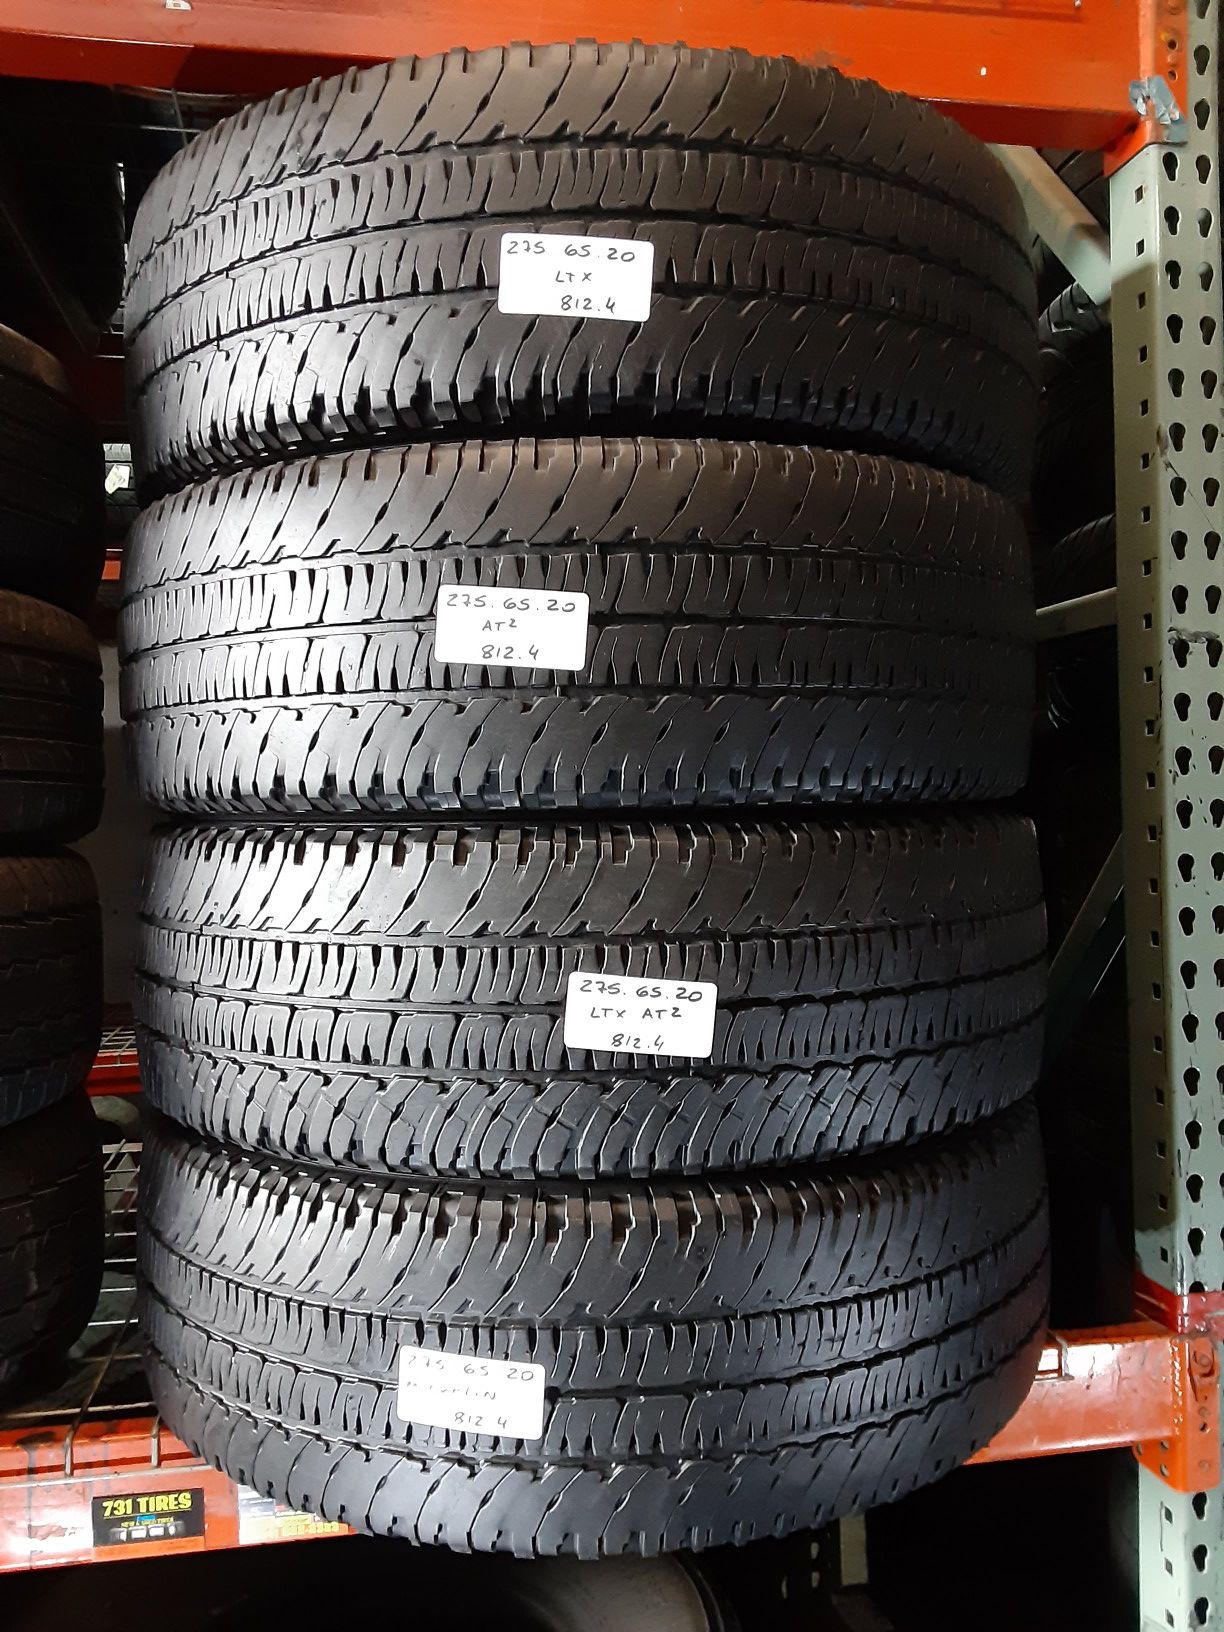 (4) USED TIRES LT275/65 R20 MICHELIN LTX AT2 275 65 20 TRUCK TIRES